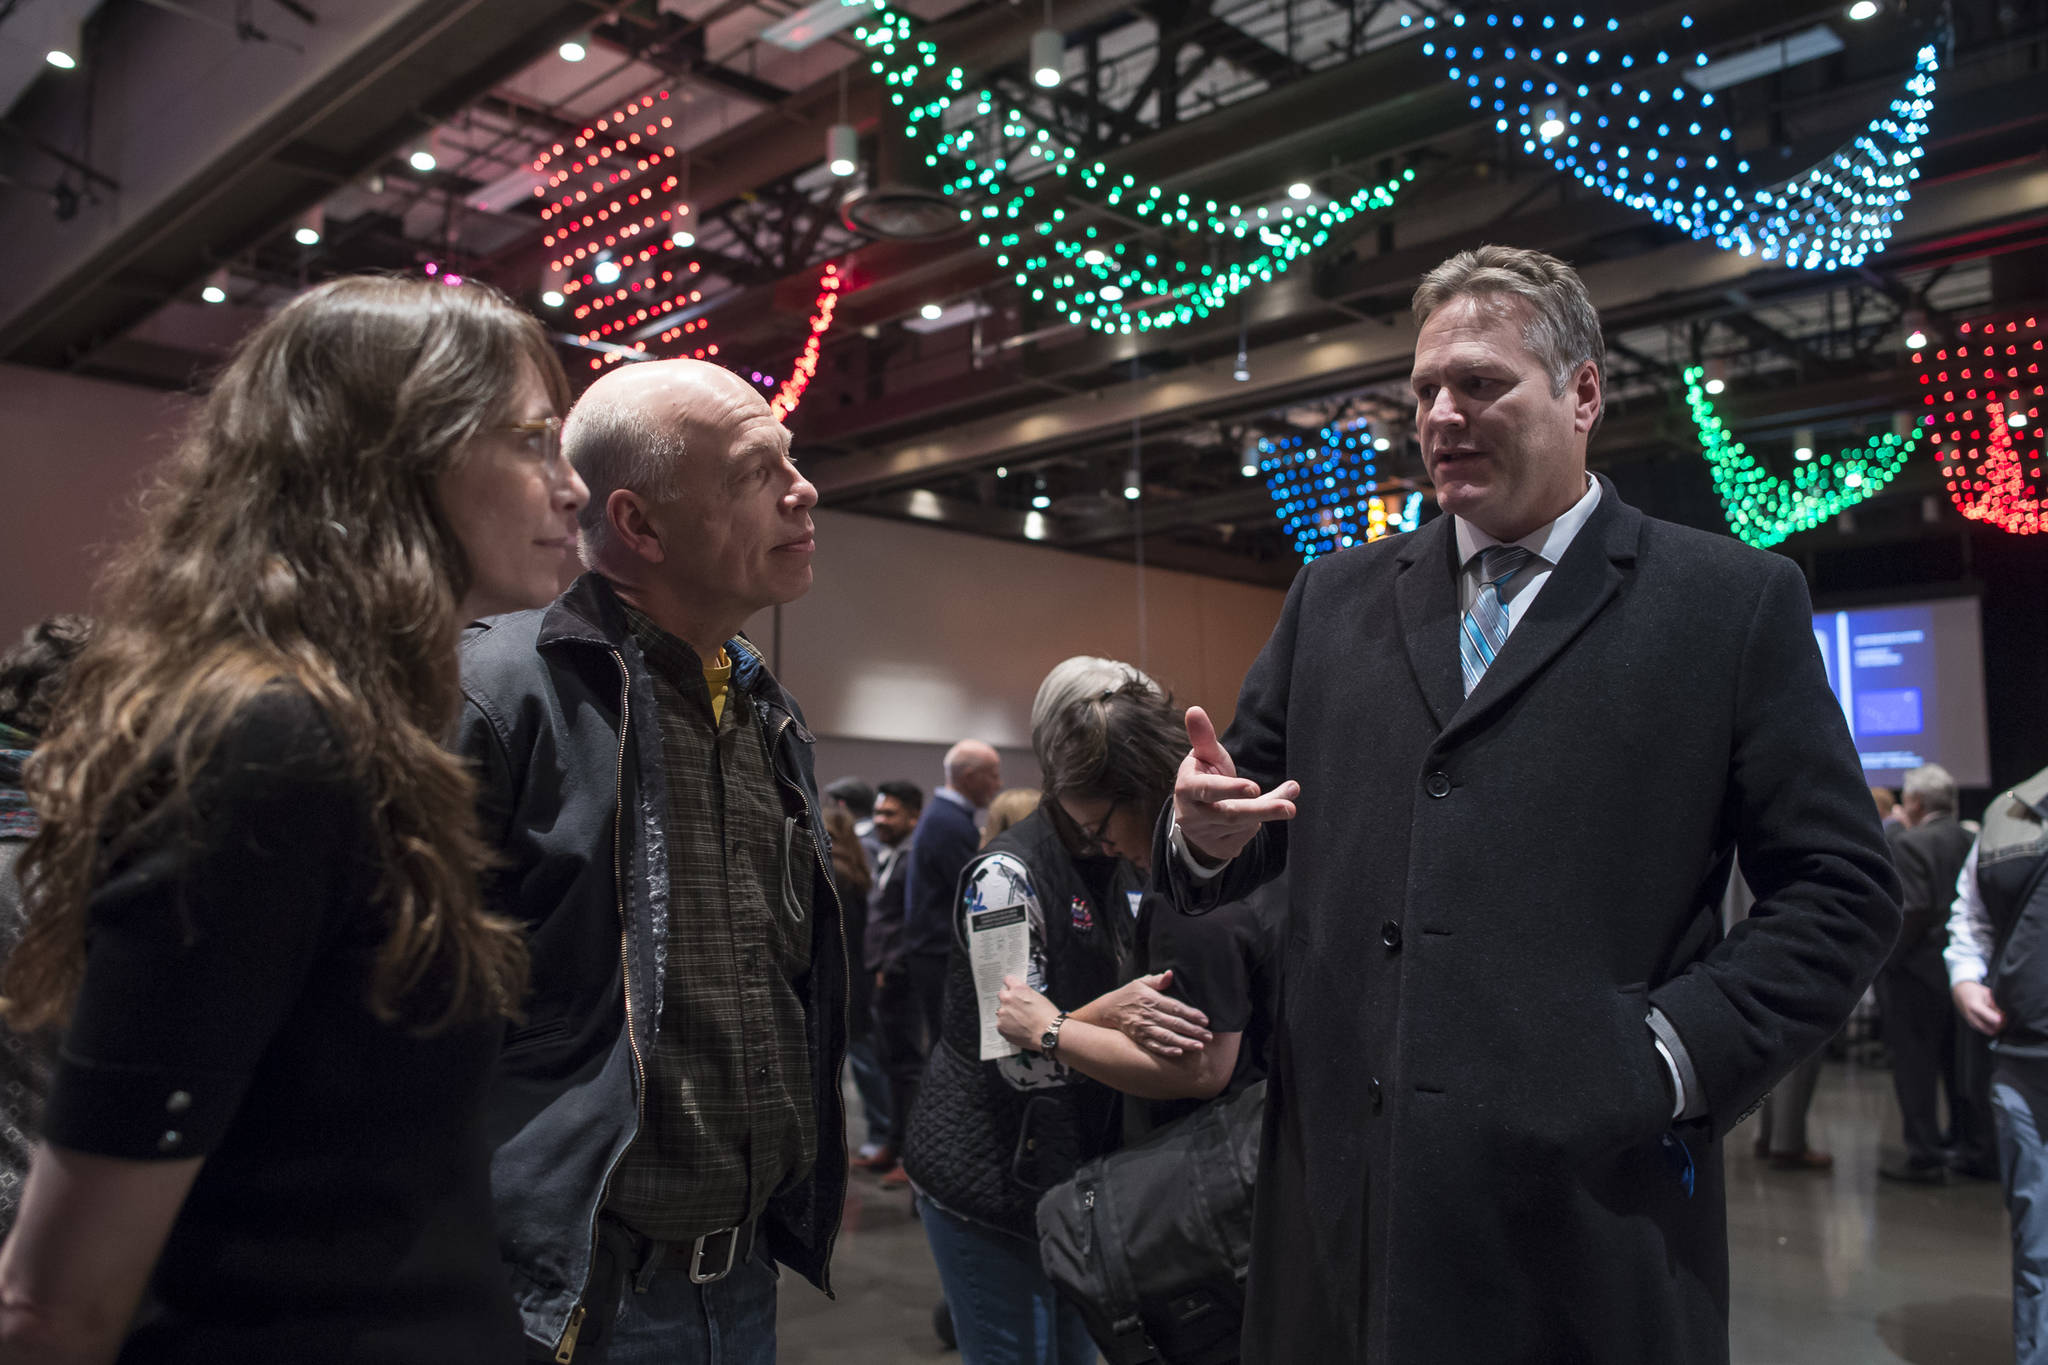 Irene Gallion and Eric Nelson meet with Gov. Michael J. Dunleavy at the 34th Annual Community Welcome Reception at Centennial Hall on Wednesday, Jan. 16, 2019. The reception is funded by donations from businesses, organizations and individuals. (Michael Penn | Juneau Empire)